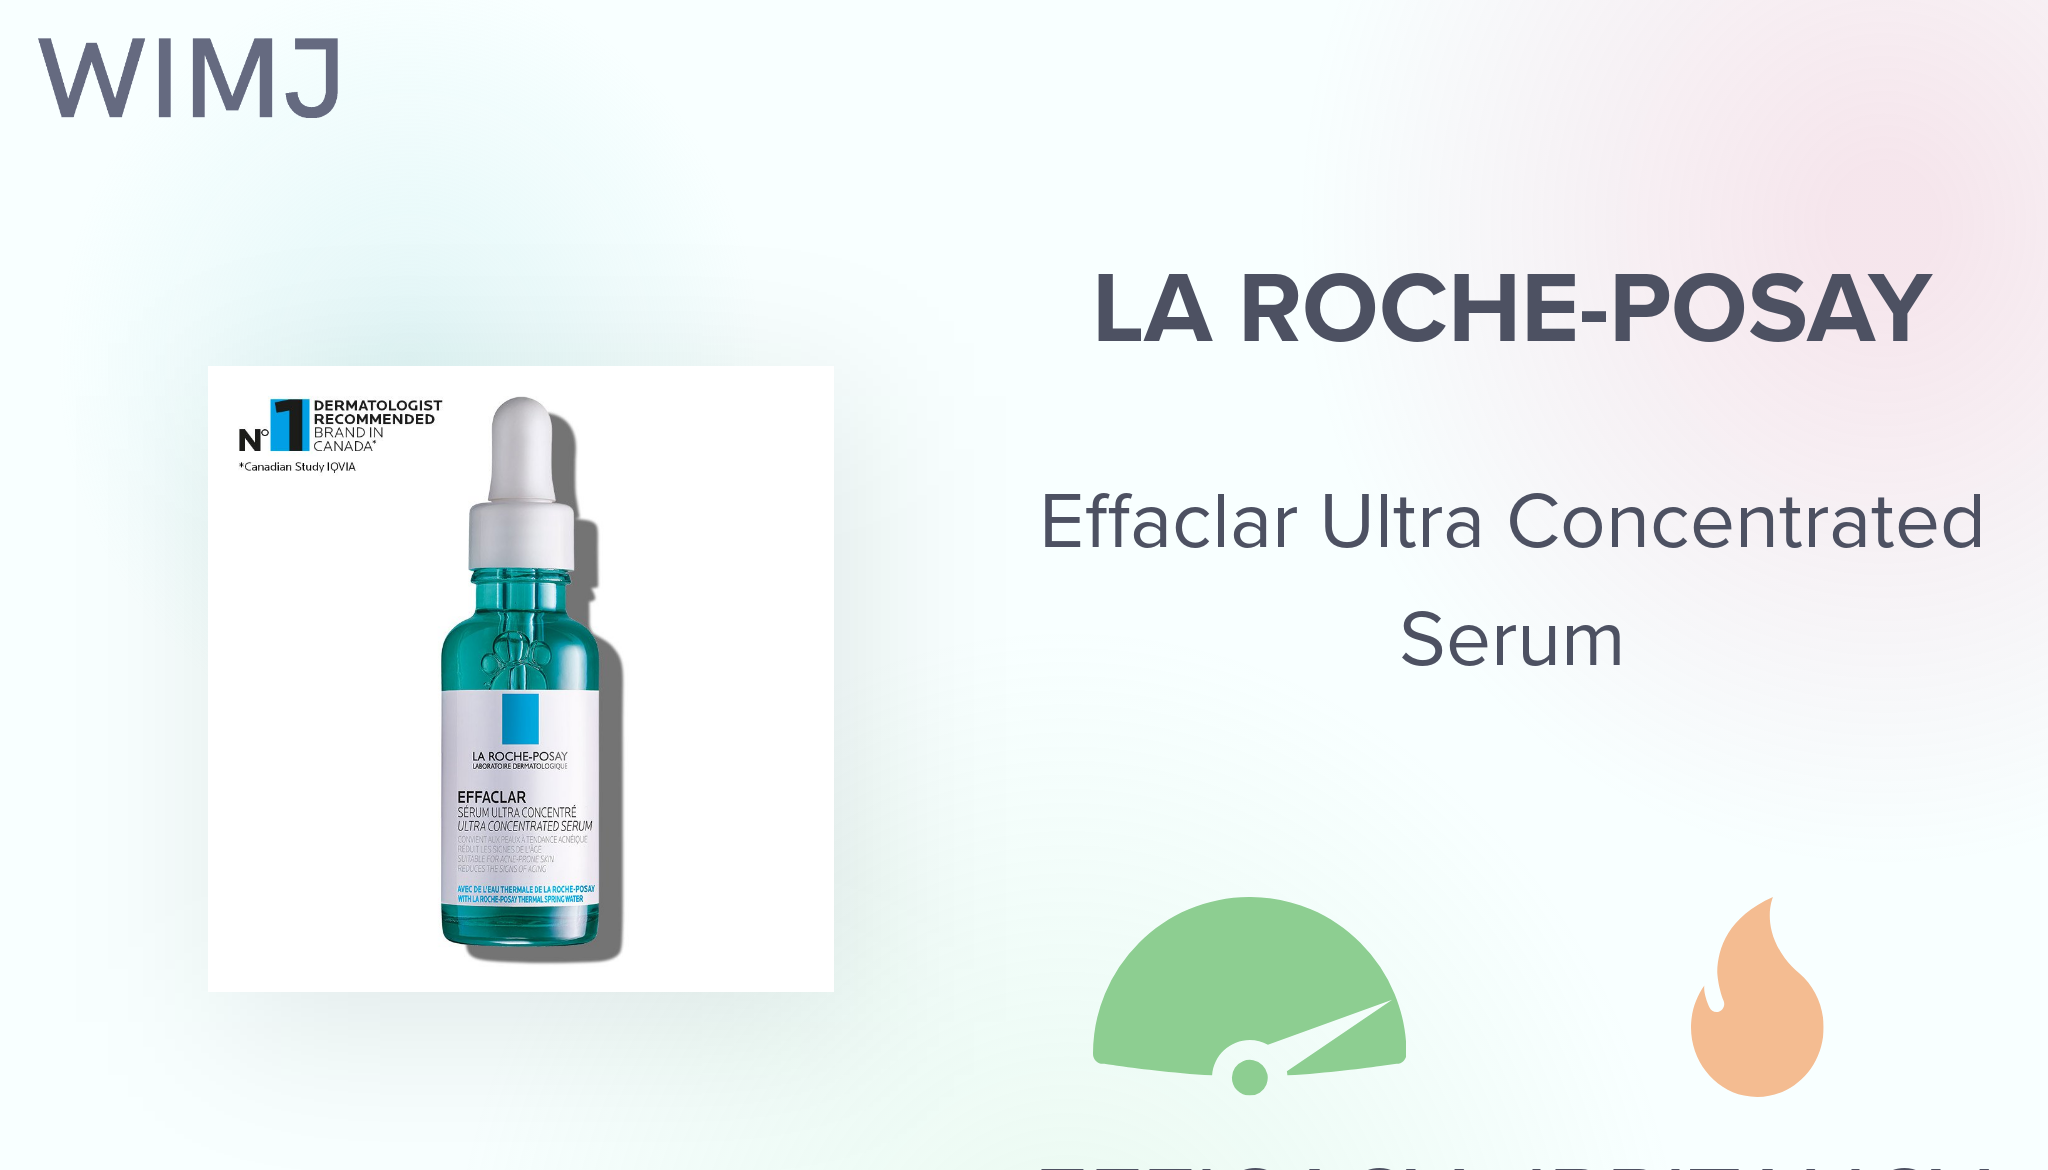 Review: La Roche-Posay - Effaclar Ultra Concentrated Serum